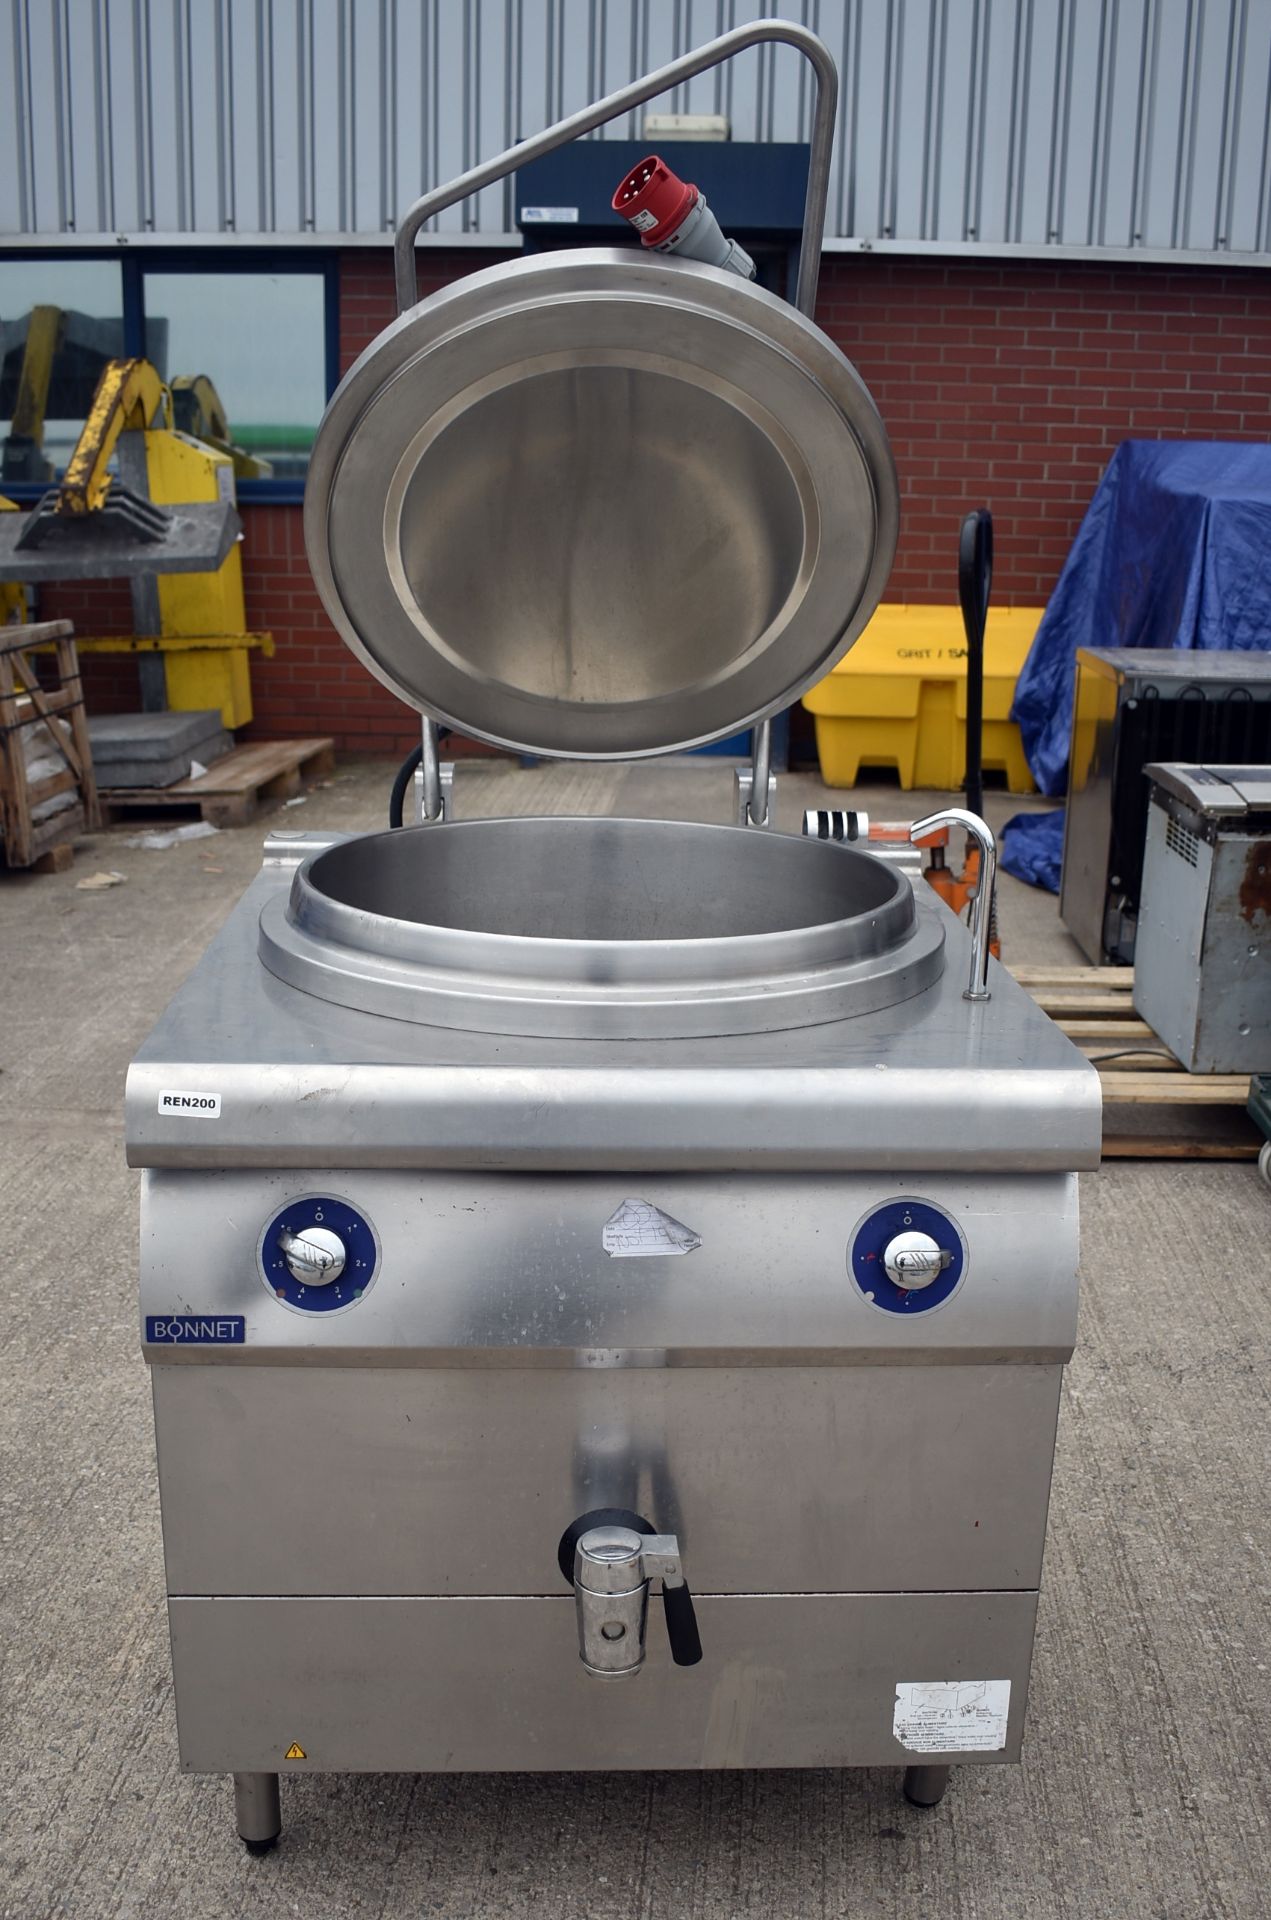 1 x Bonnet Advancia Boiling Pan With Stainless Steel Finish - 3 Phase - RRP: £8,000 - Image 11 of 14